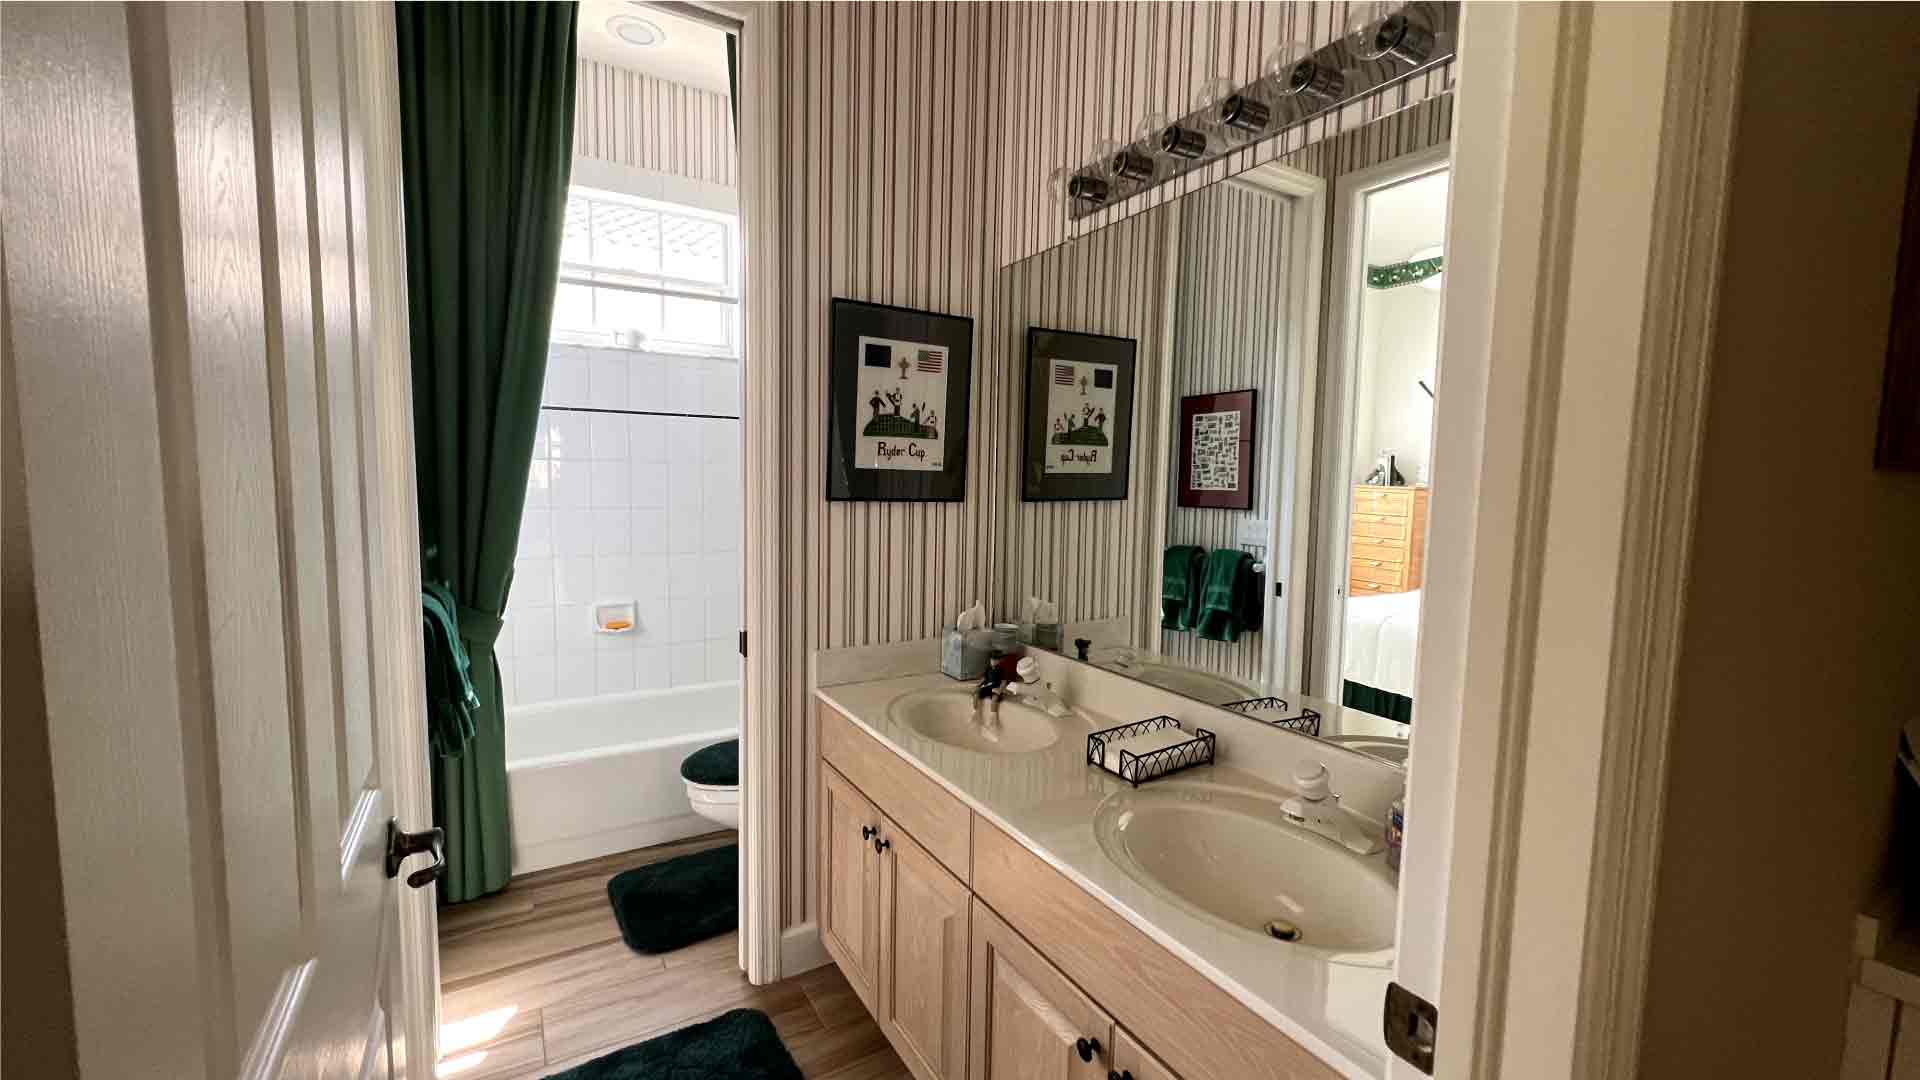 Bathroom - Regular cleaning in Cape Coral by Goldmillio - Apr 18